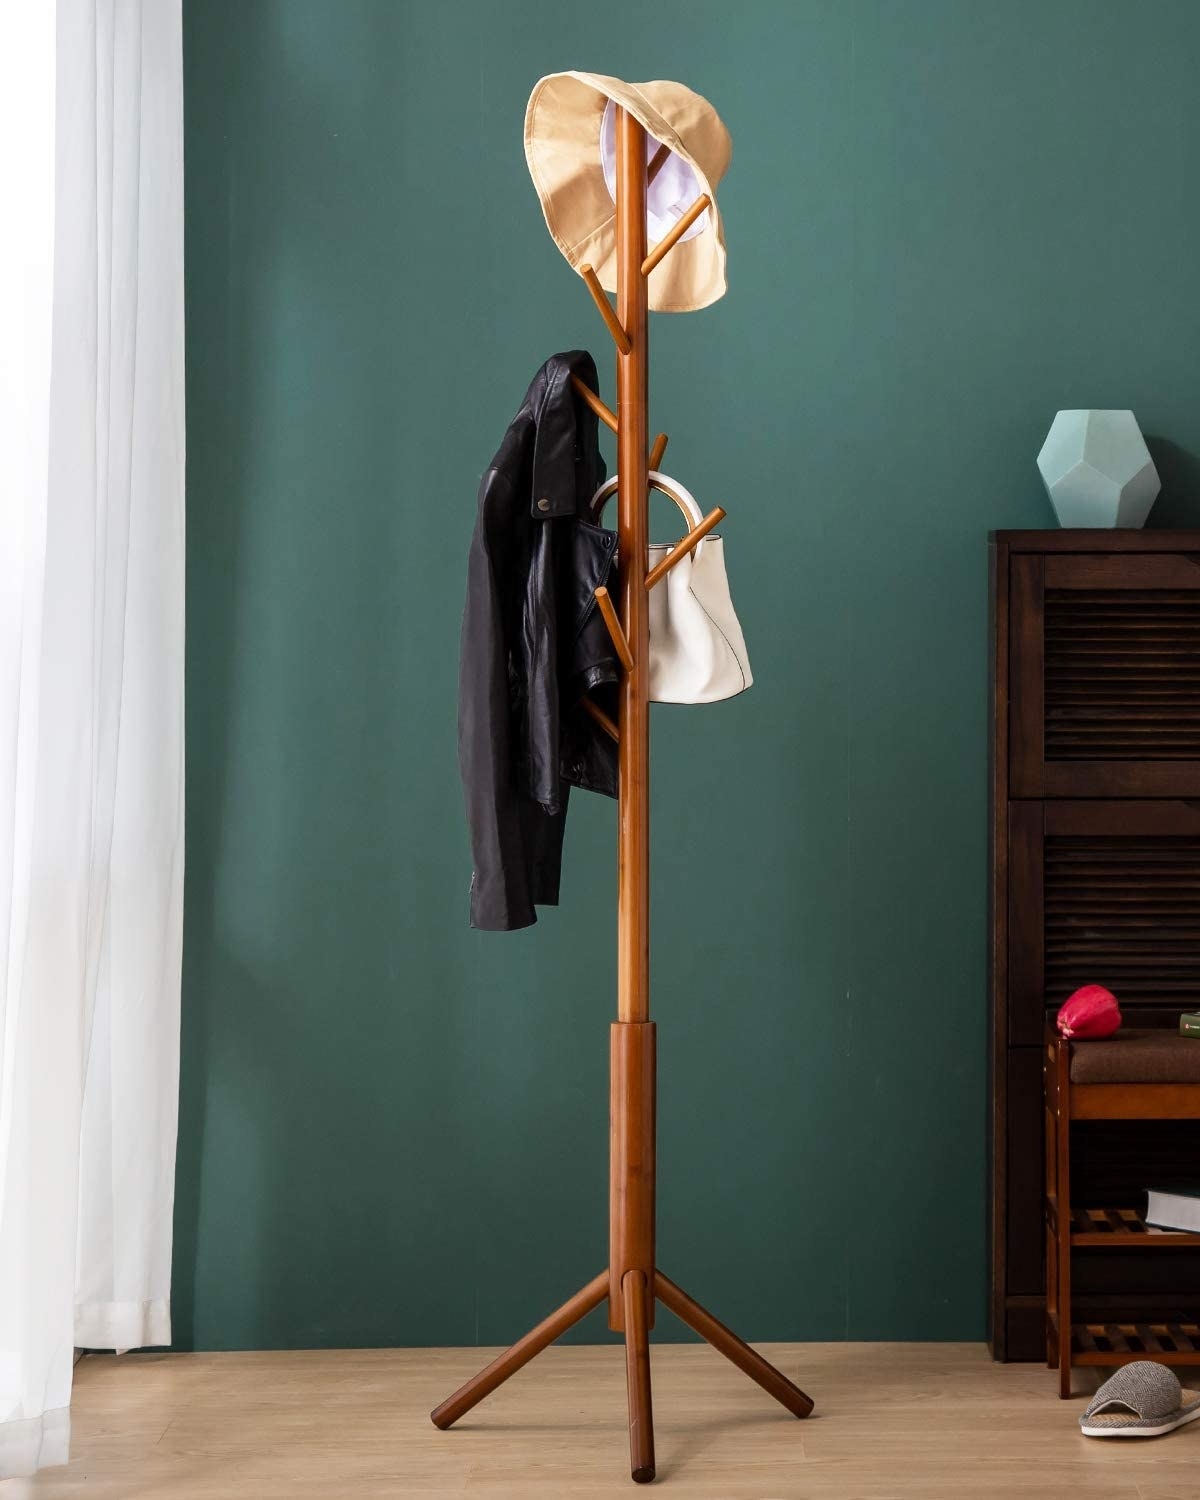 The wood coatrack holding a jacket, bag, and hat